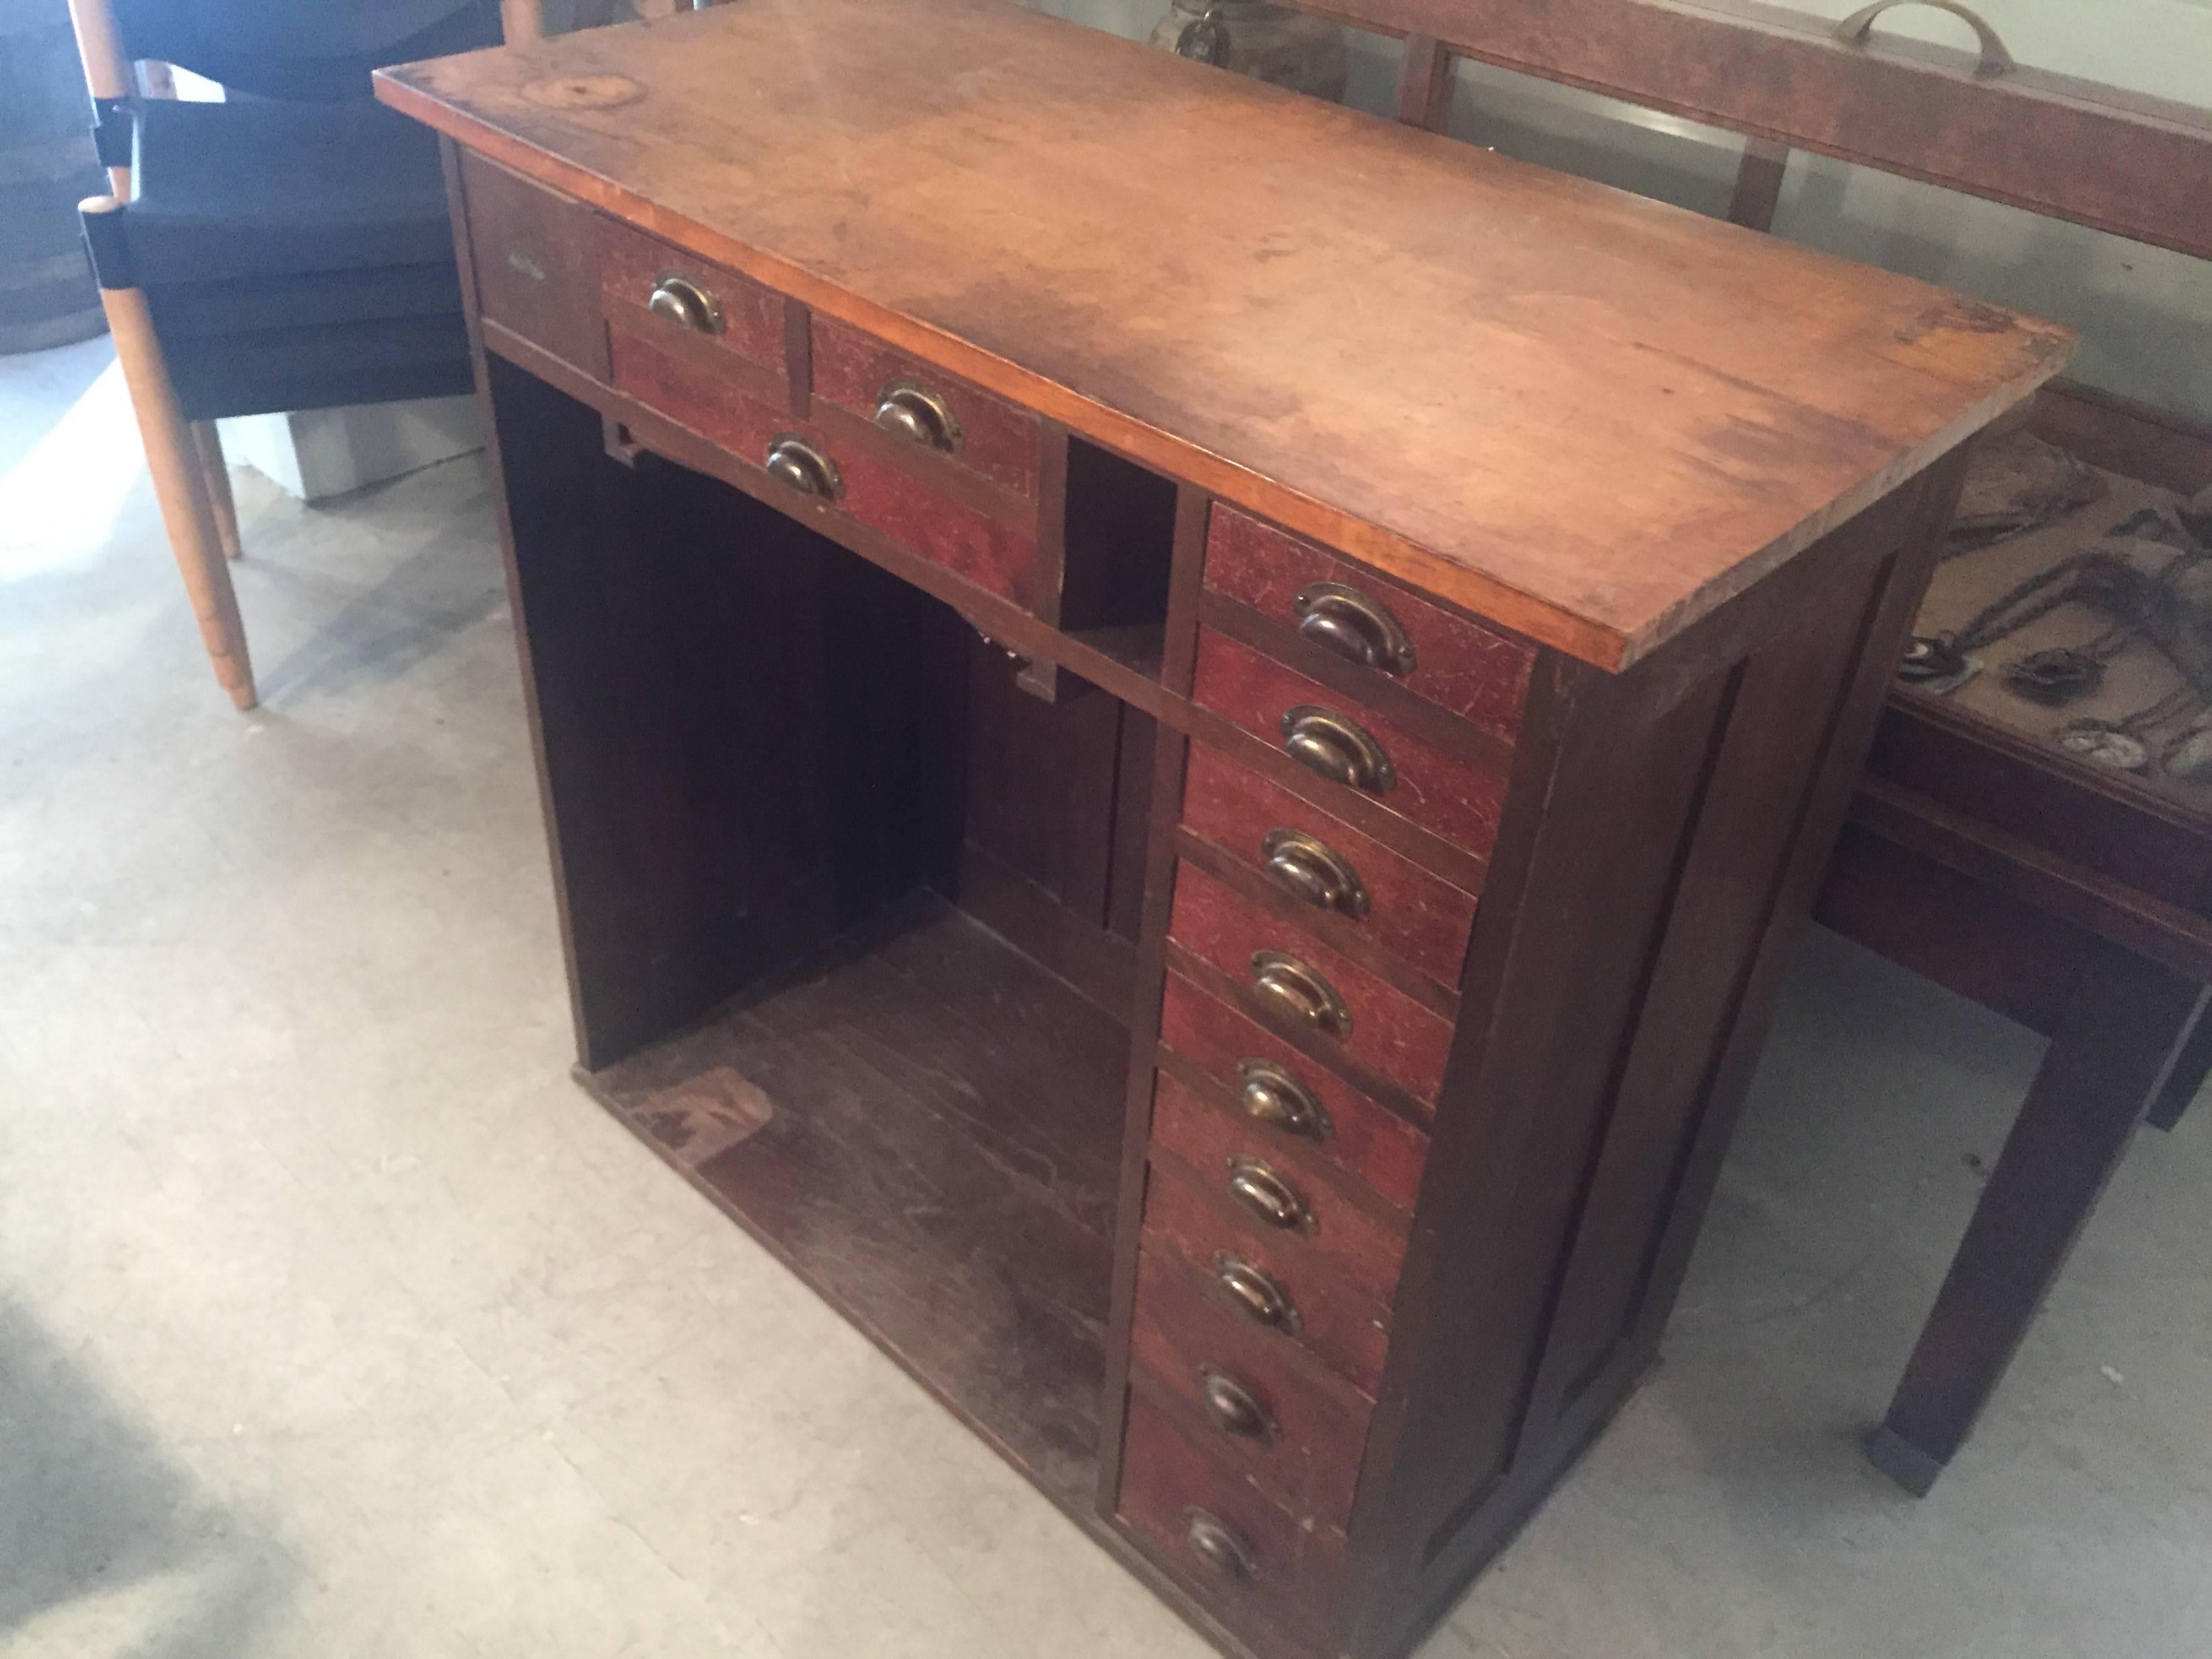 Great, circa 1900 Jewellers work table. Multi drawer cabinet with great patina and nice surface. Can be used for lots of things. Would look great with a period Toledo Stool.